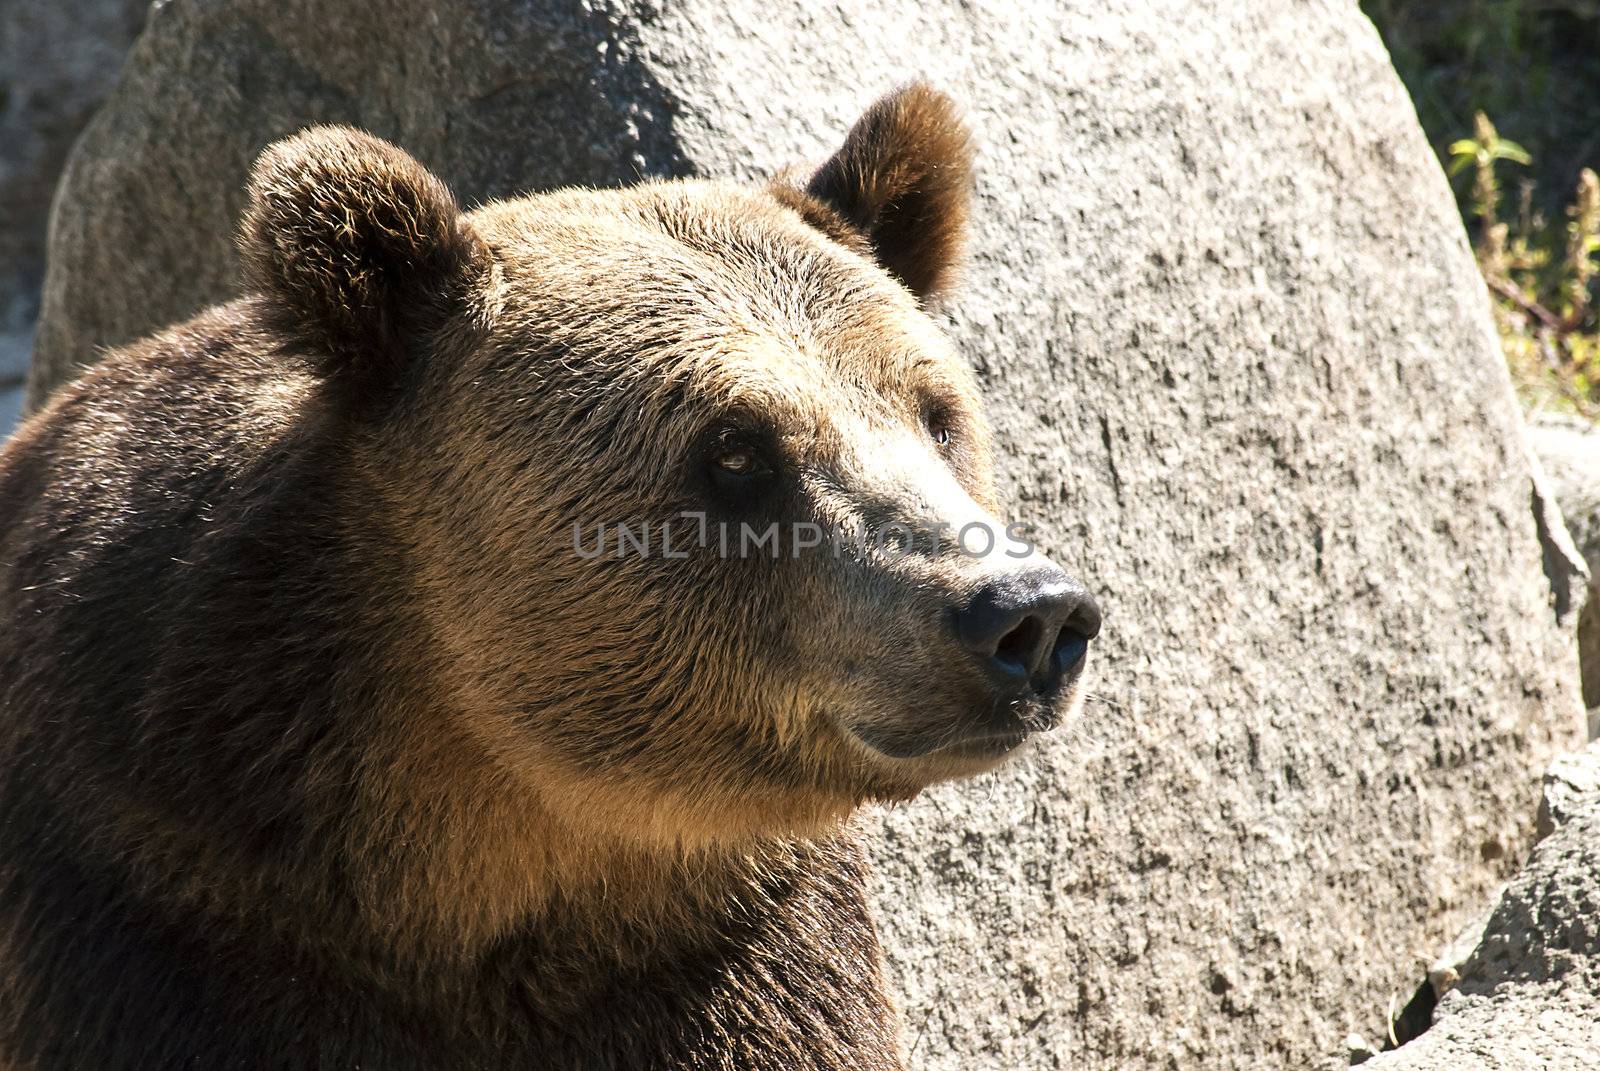 Grizzly bear head right profile by varbenov